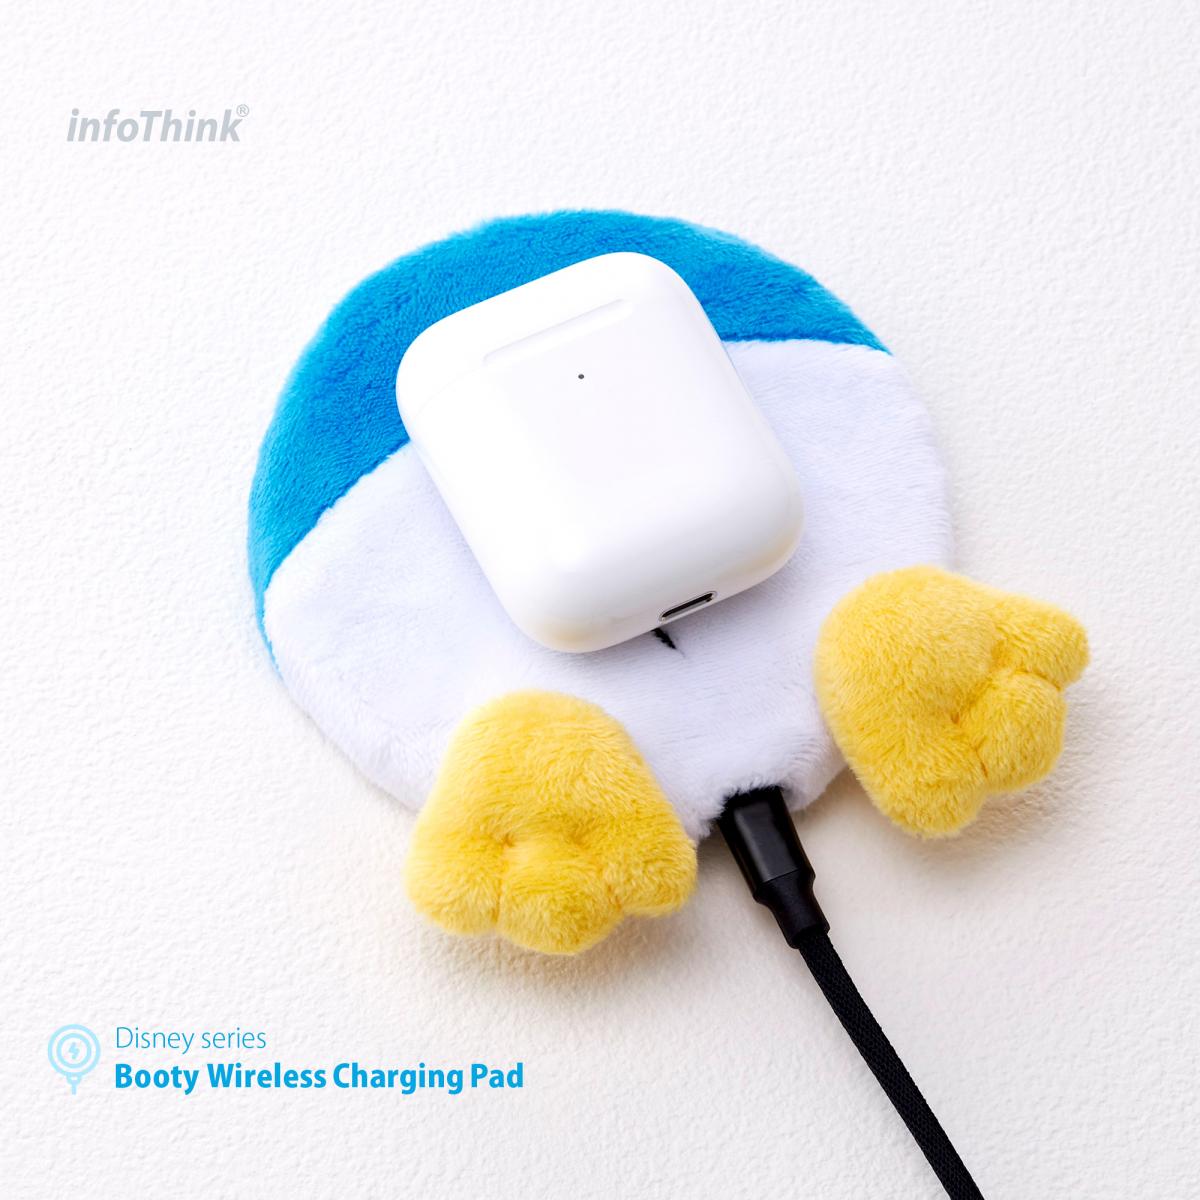 InfoThink Disney iWCQ-200 Booty Wireless Charger Charging Pad Donald Duck ver